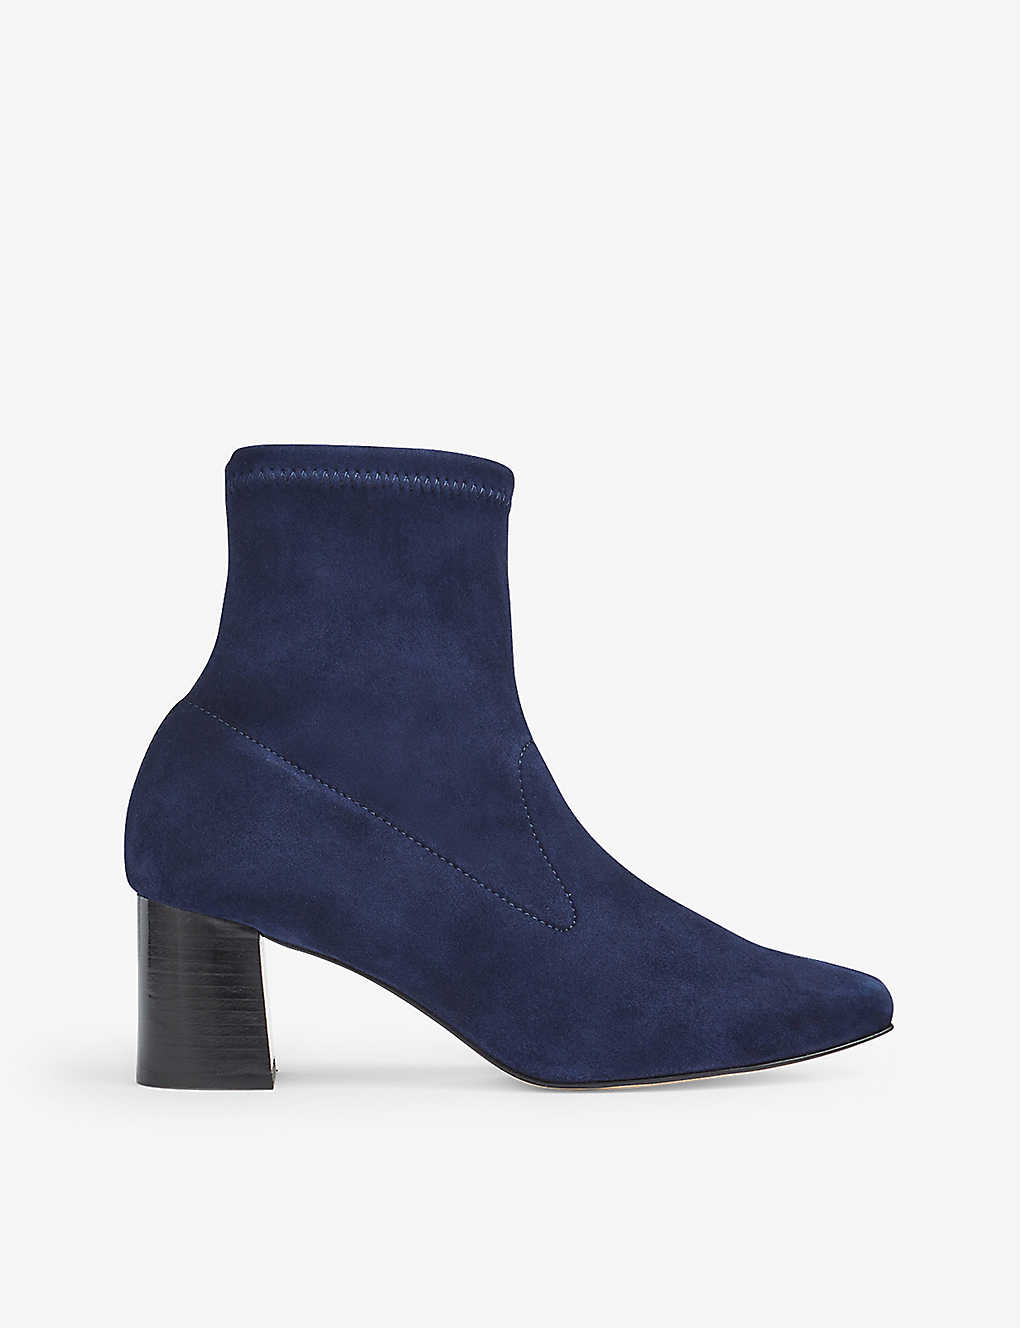 Lk Bennett Womens Blu-navy Amira Square-toe Suede Heeled Ankle Boots